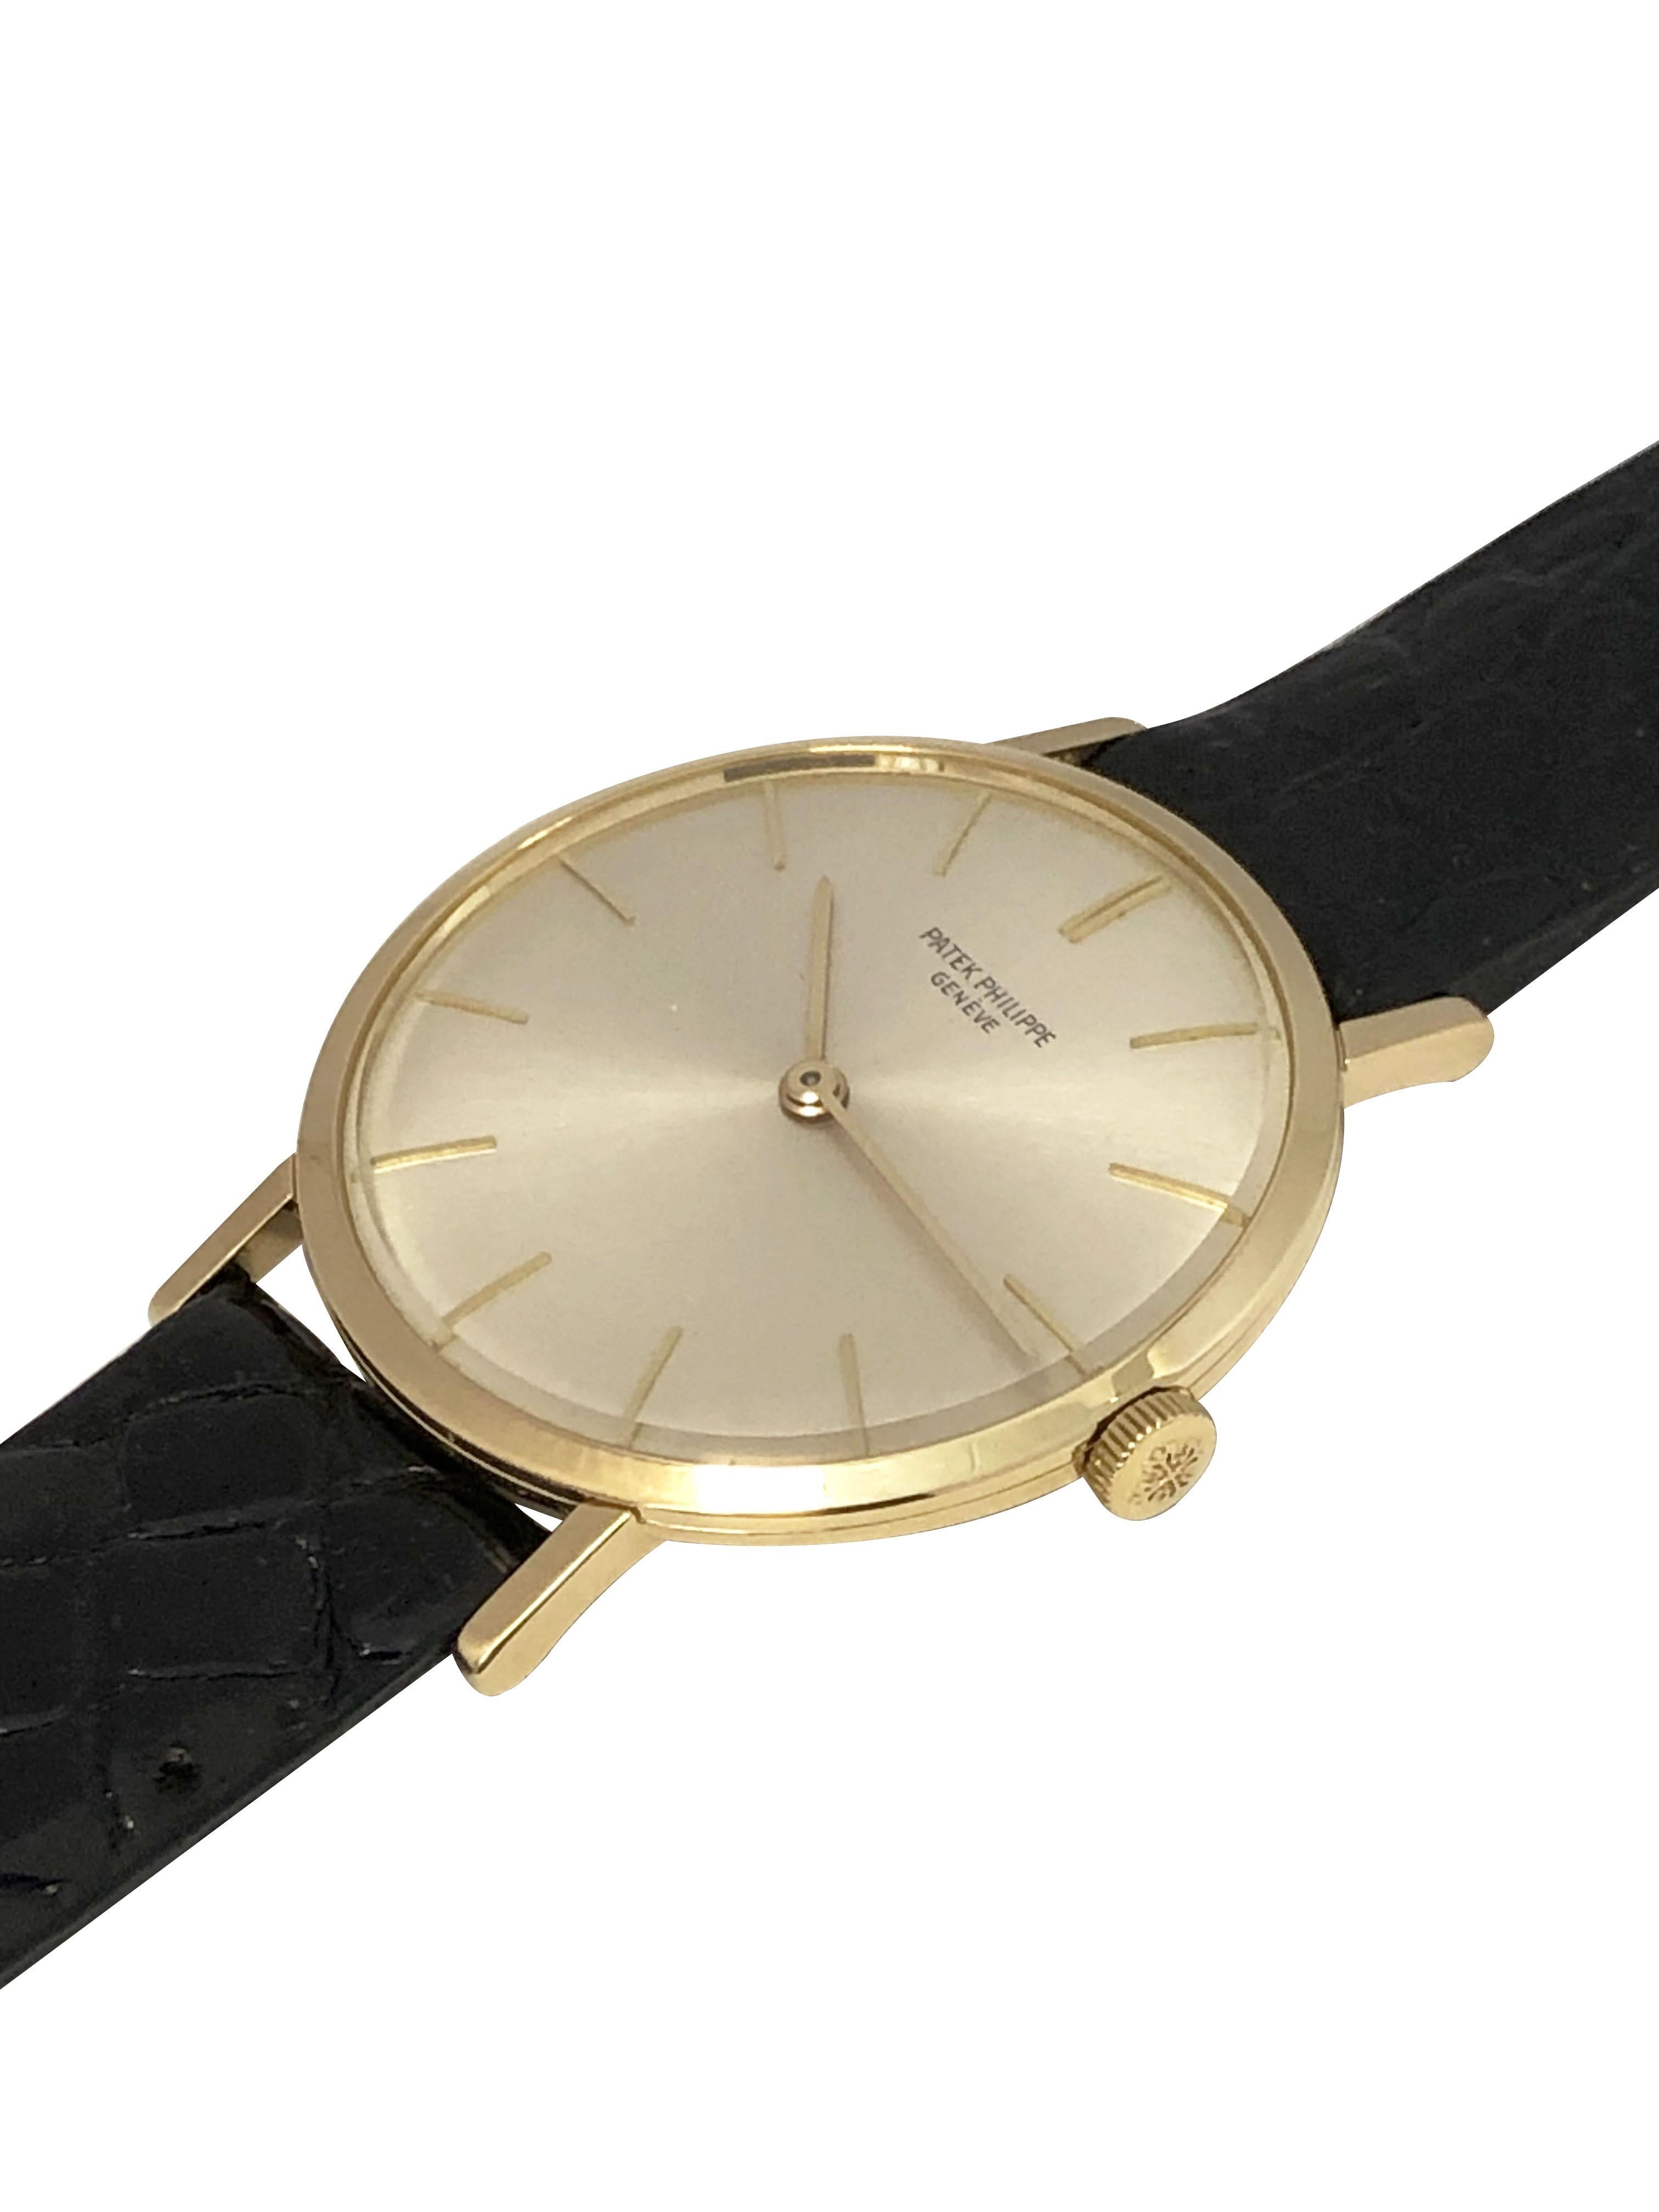 Circa 1960s Patek Philippe Reference 3537 Wrist Watch, 33 M.M. 3 Piece 18k Yellow Gold case, 7 M.M. thick. 18 Jewel caliber 23-300 Mechanical, manual wind movement. Beautiful mint silver satin dial with raised gold markers, glass crystal, Patek logo